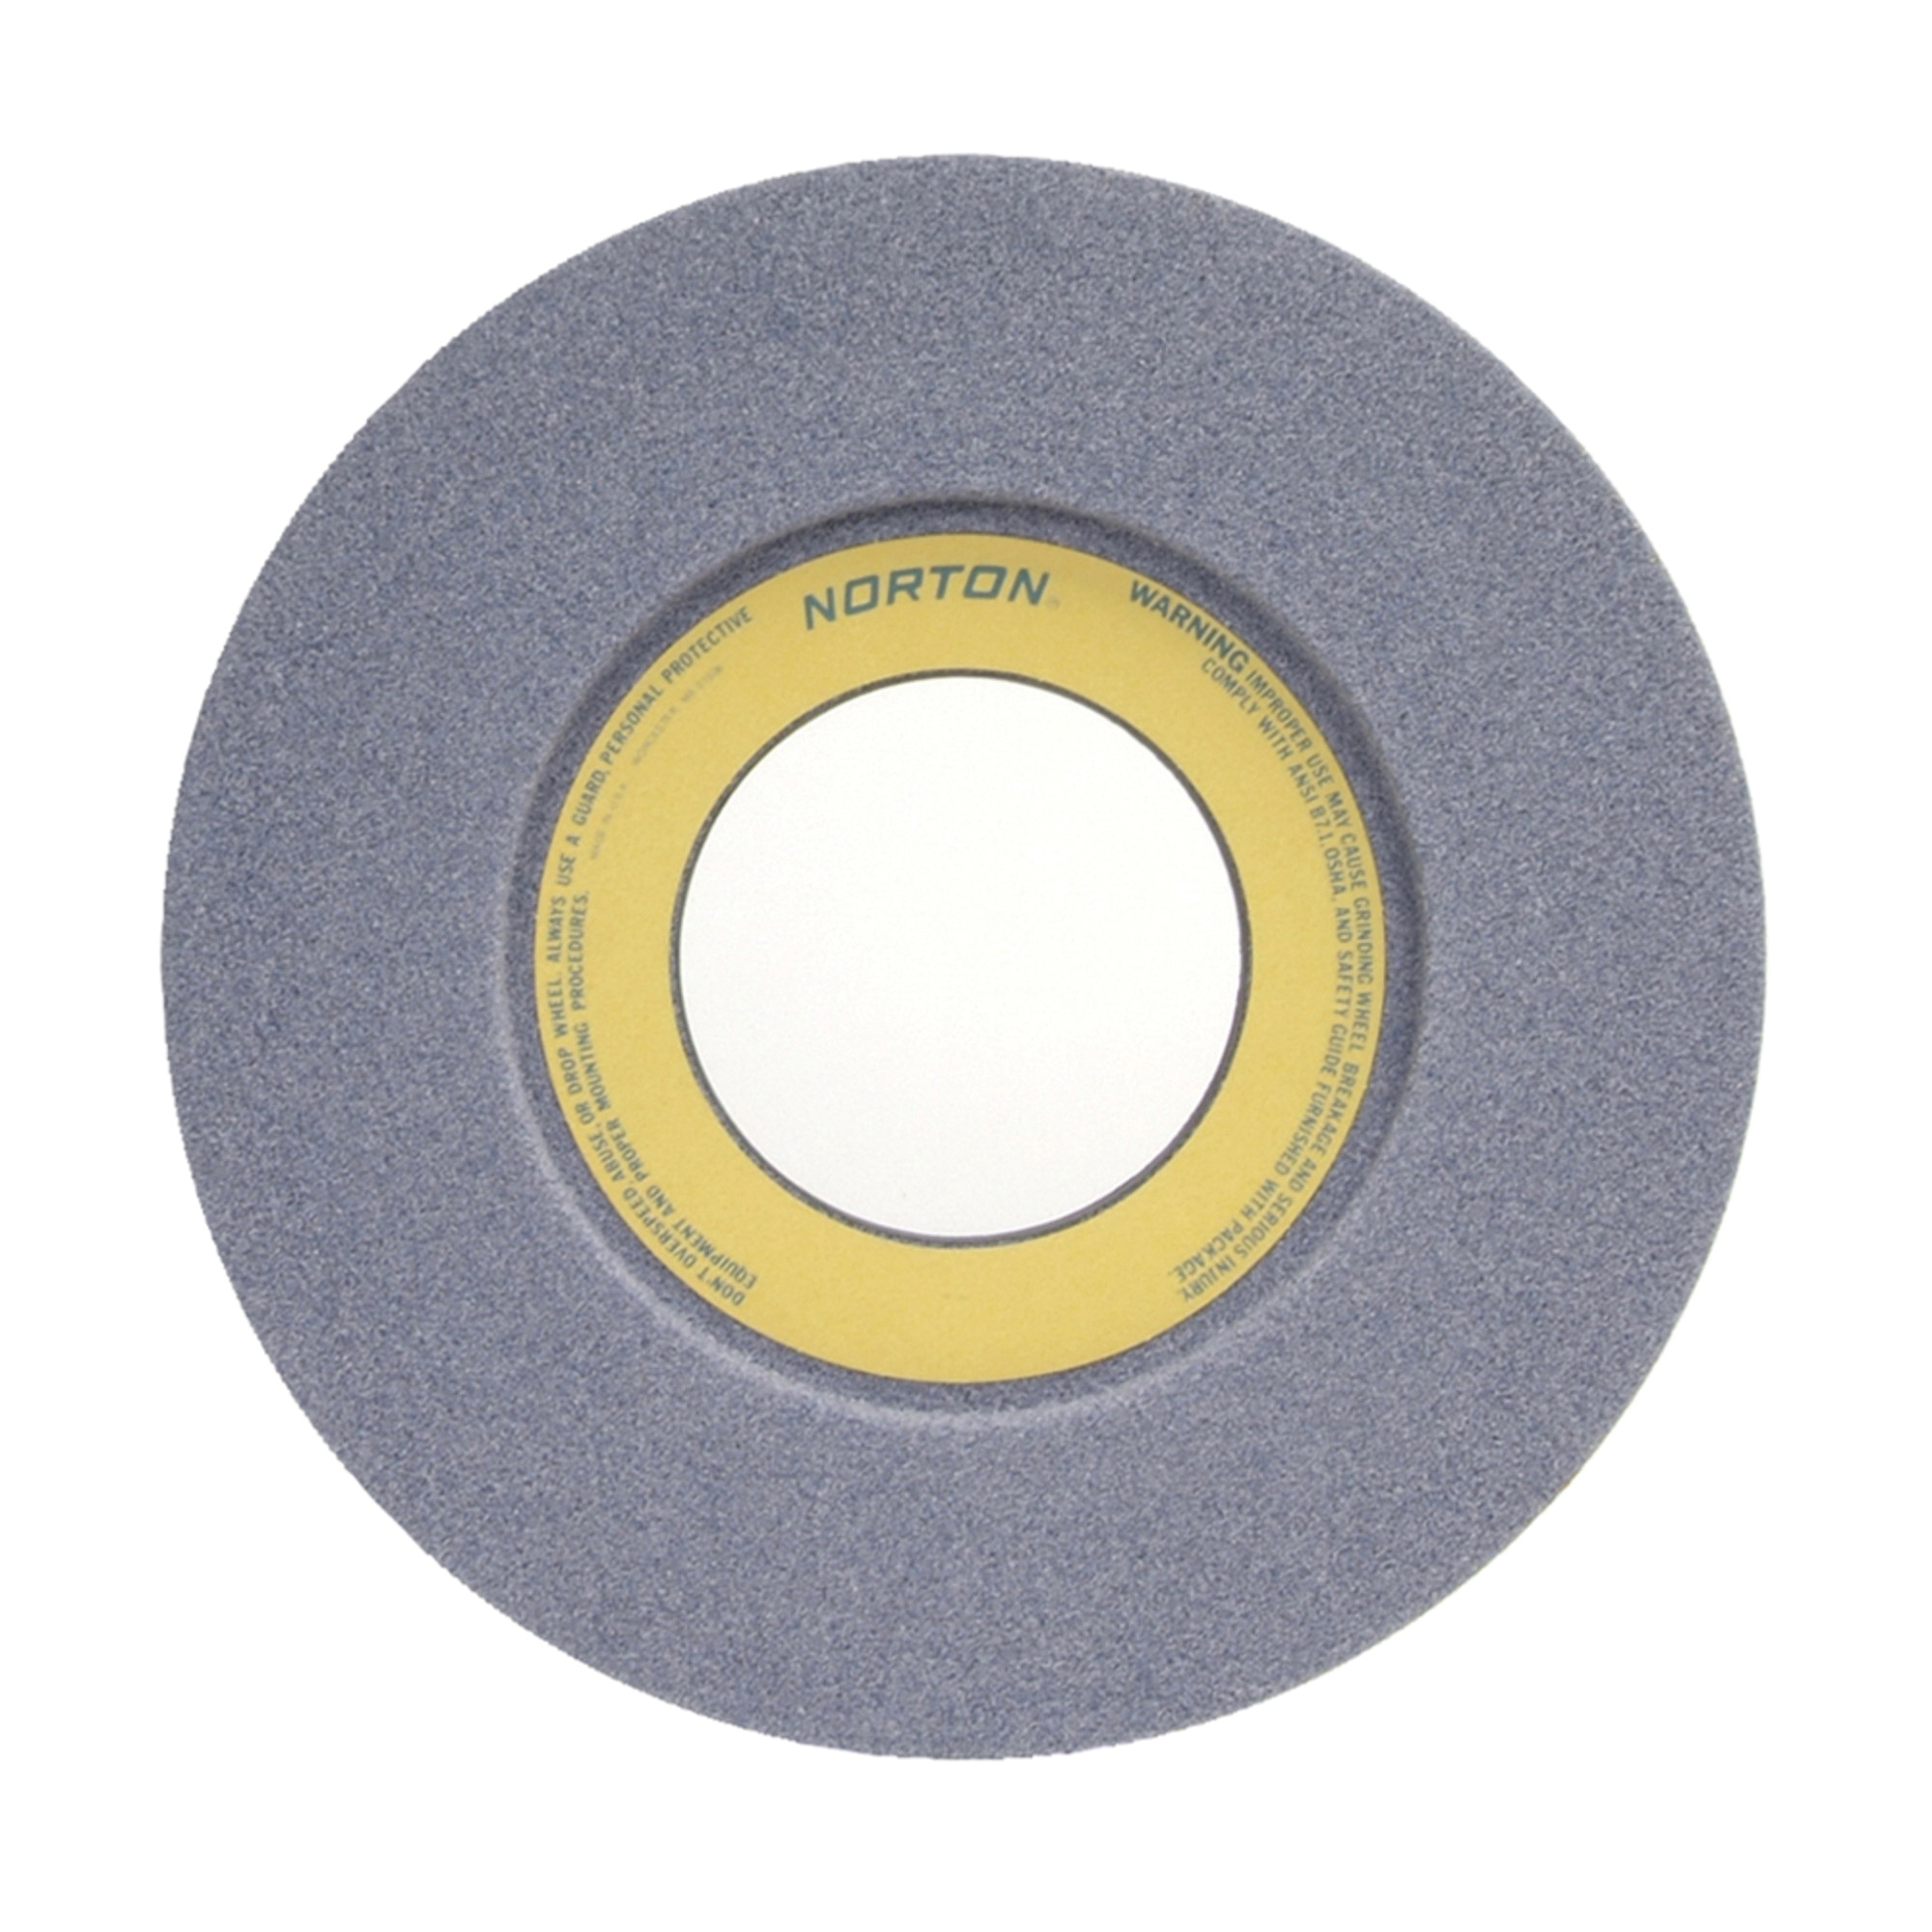 Norton® 66253263172 32A 1-Side Recessed Toolroom Wheel, 12 in Dia x 1-1/2 in THK, 5 in Center Hole, 60 Grit, Aluminum Oxide Abrasive